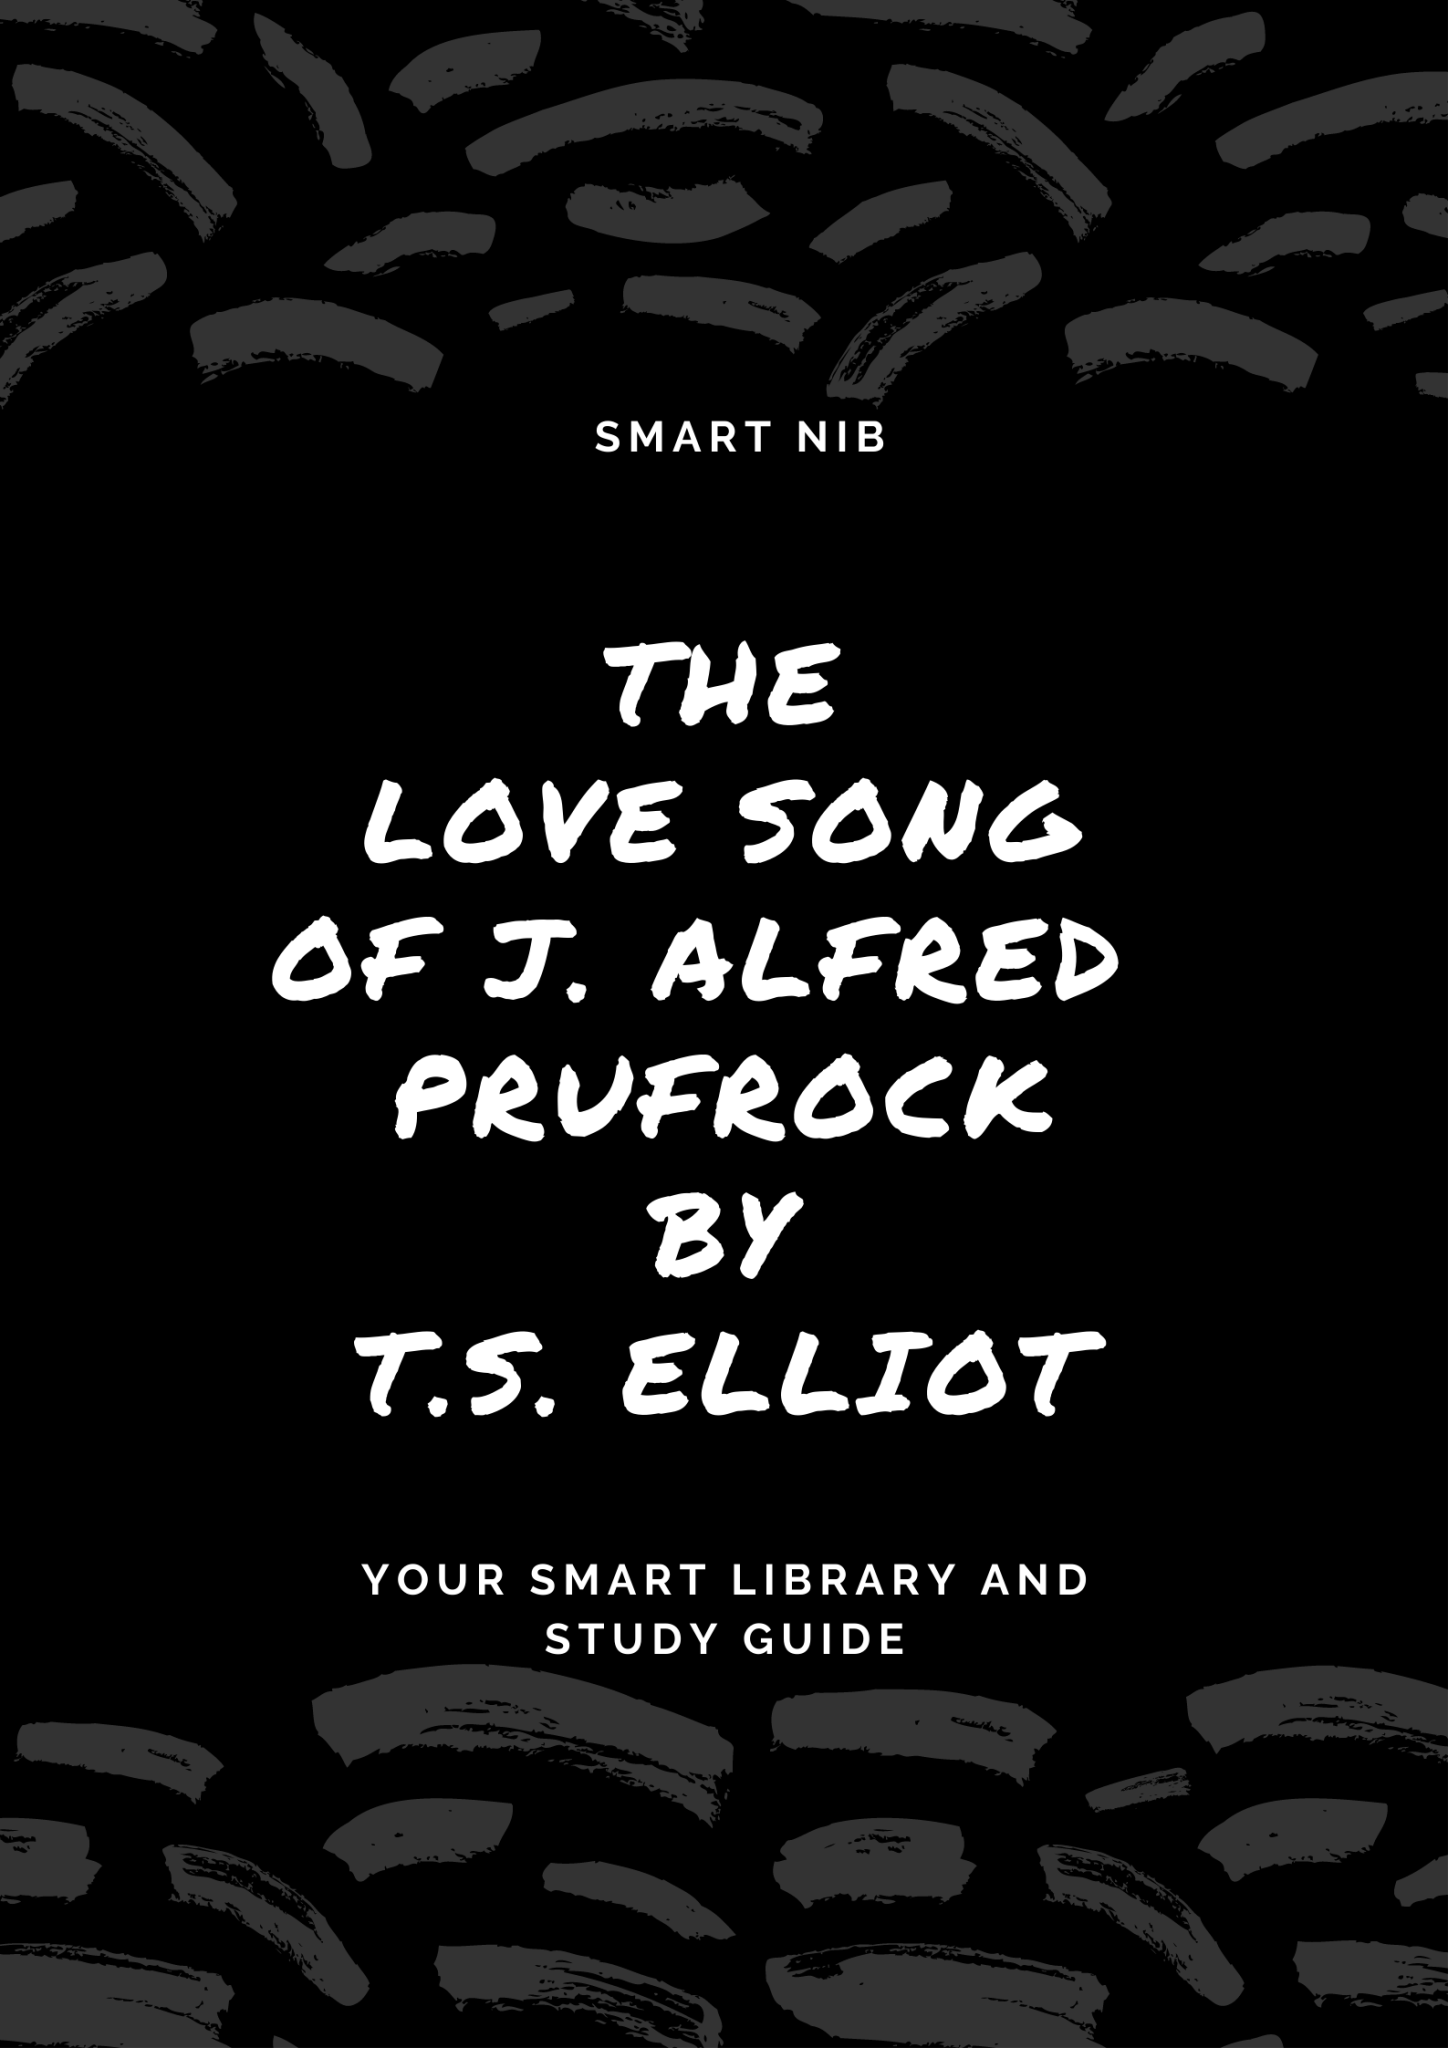 The Love Song of J. Alfred Prufrock by T. S. Eliot